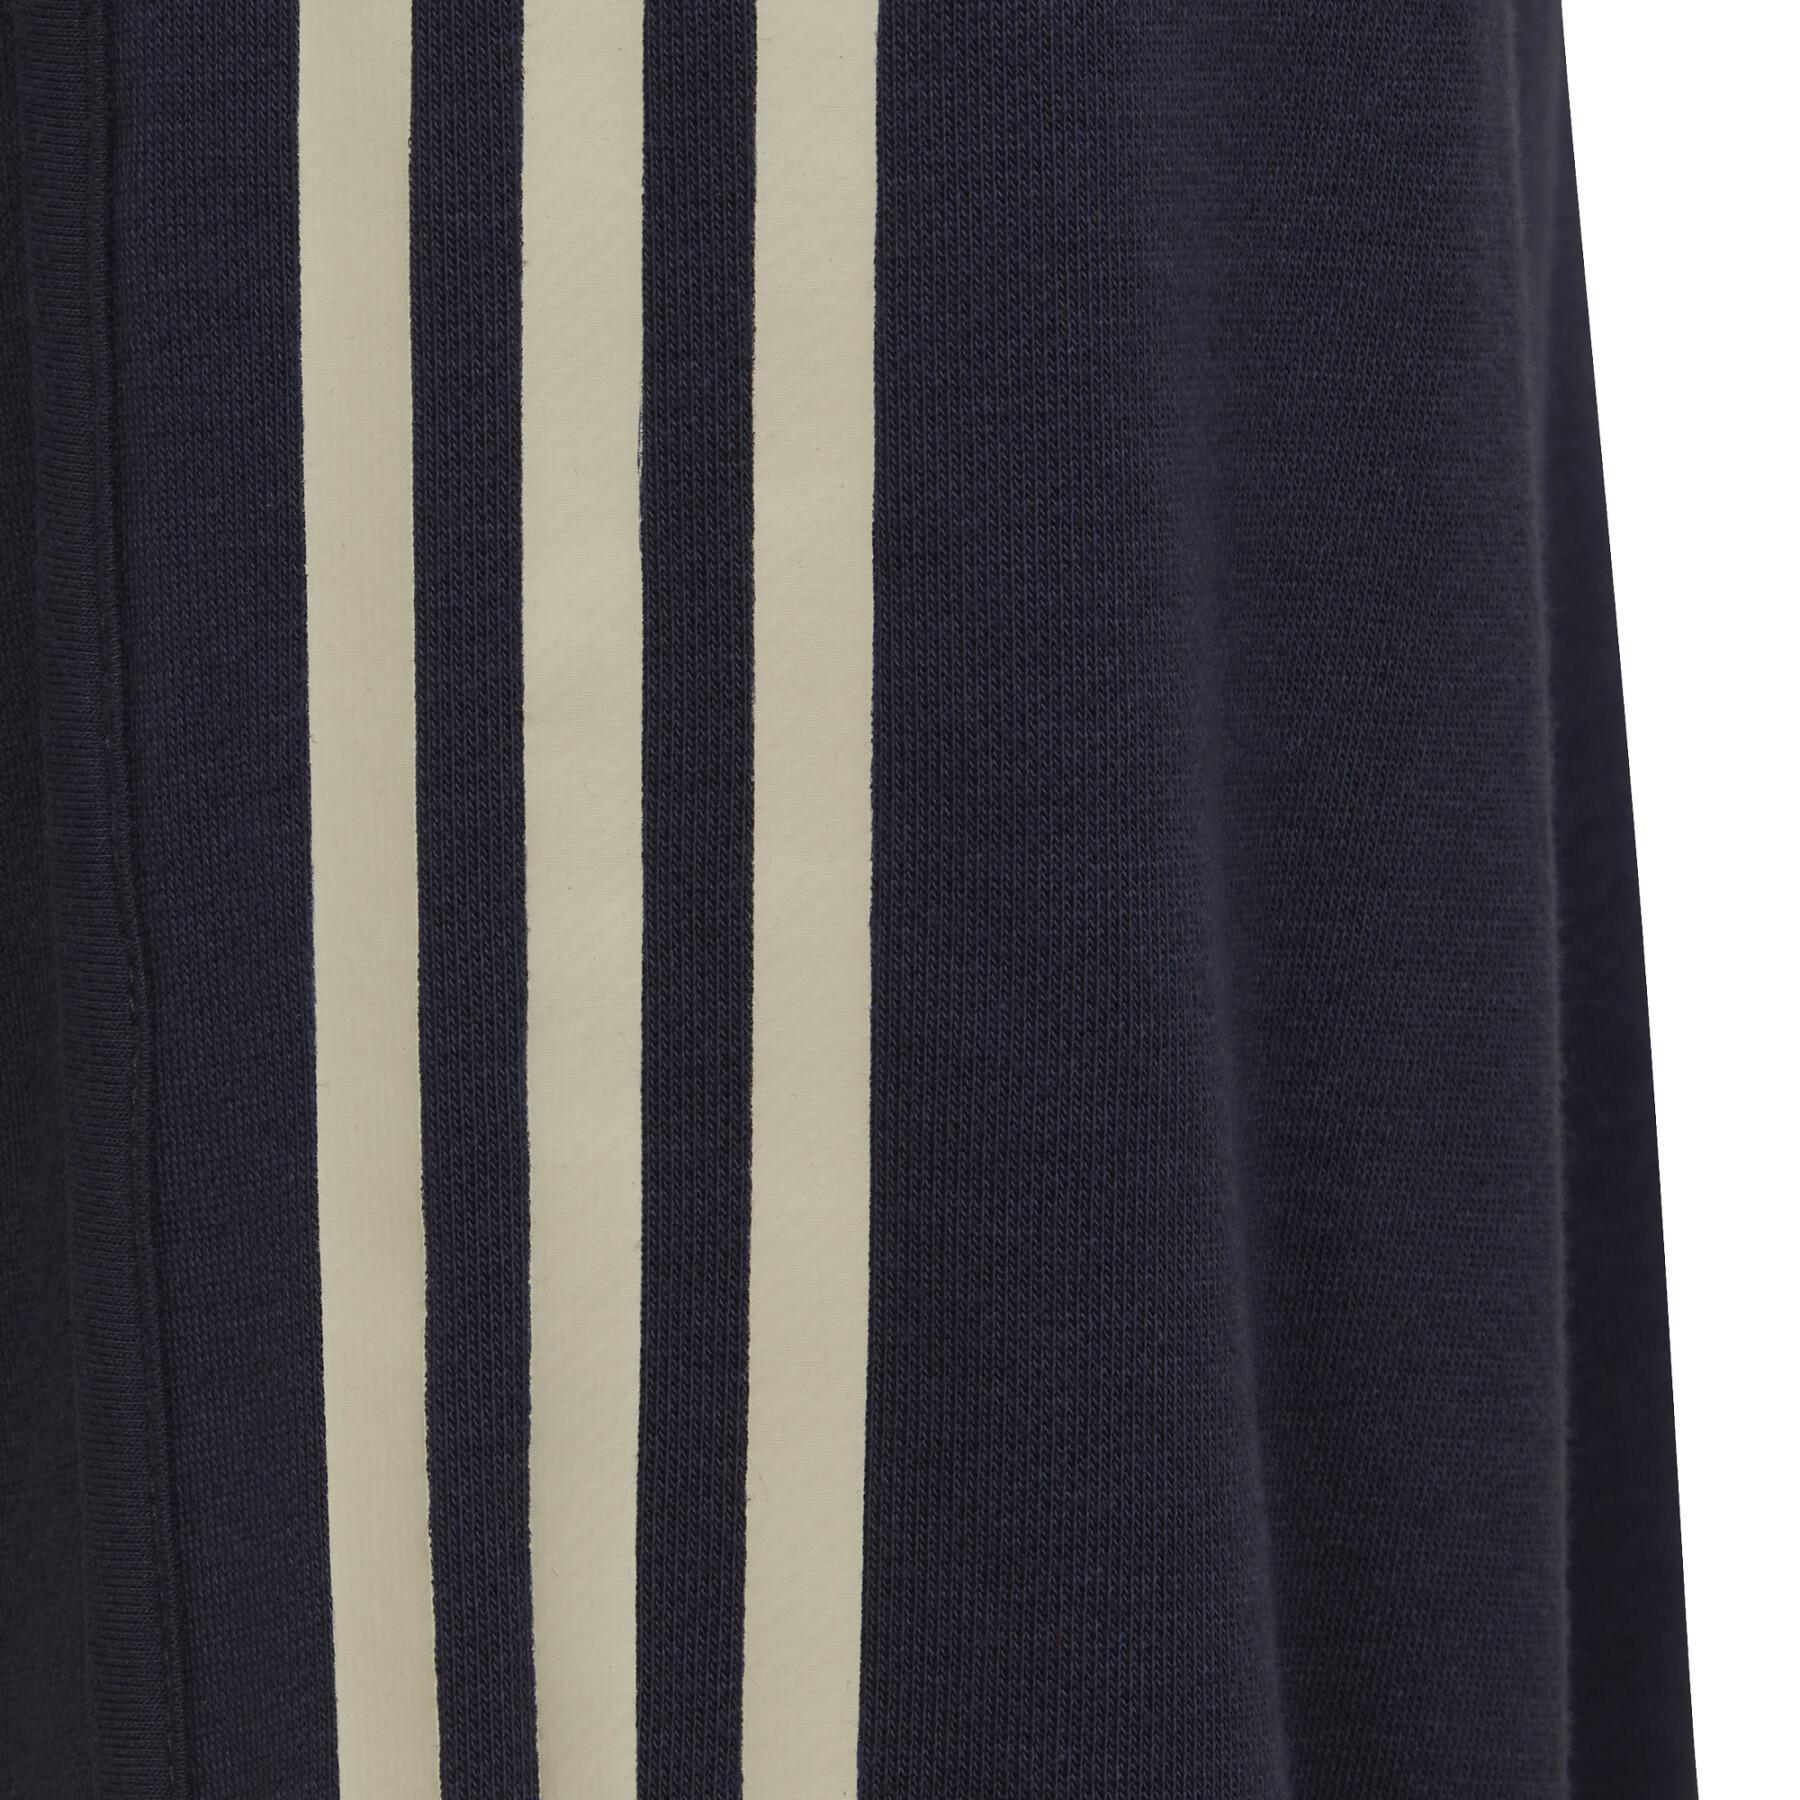 Girl's trousers adidas Power 3-Stripes Cotton